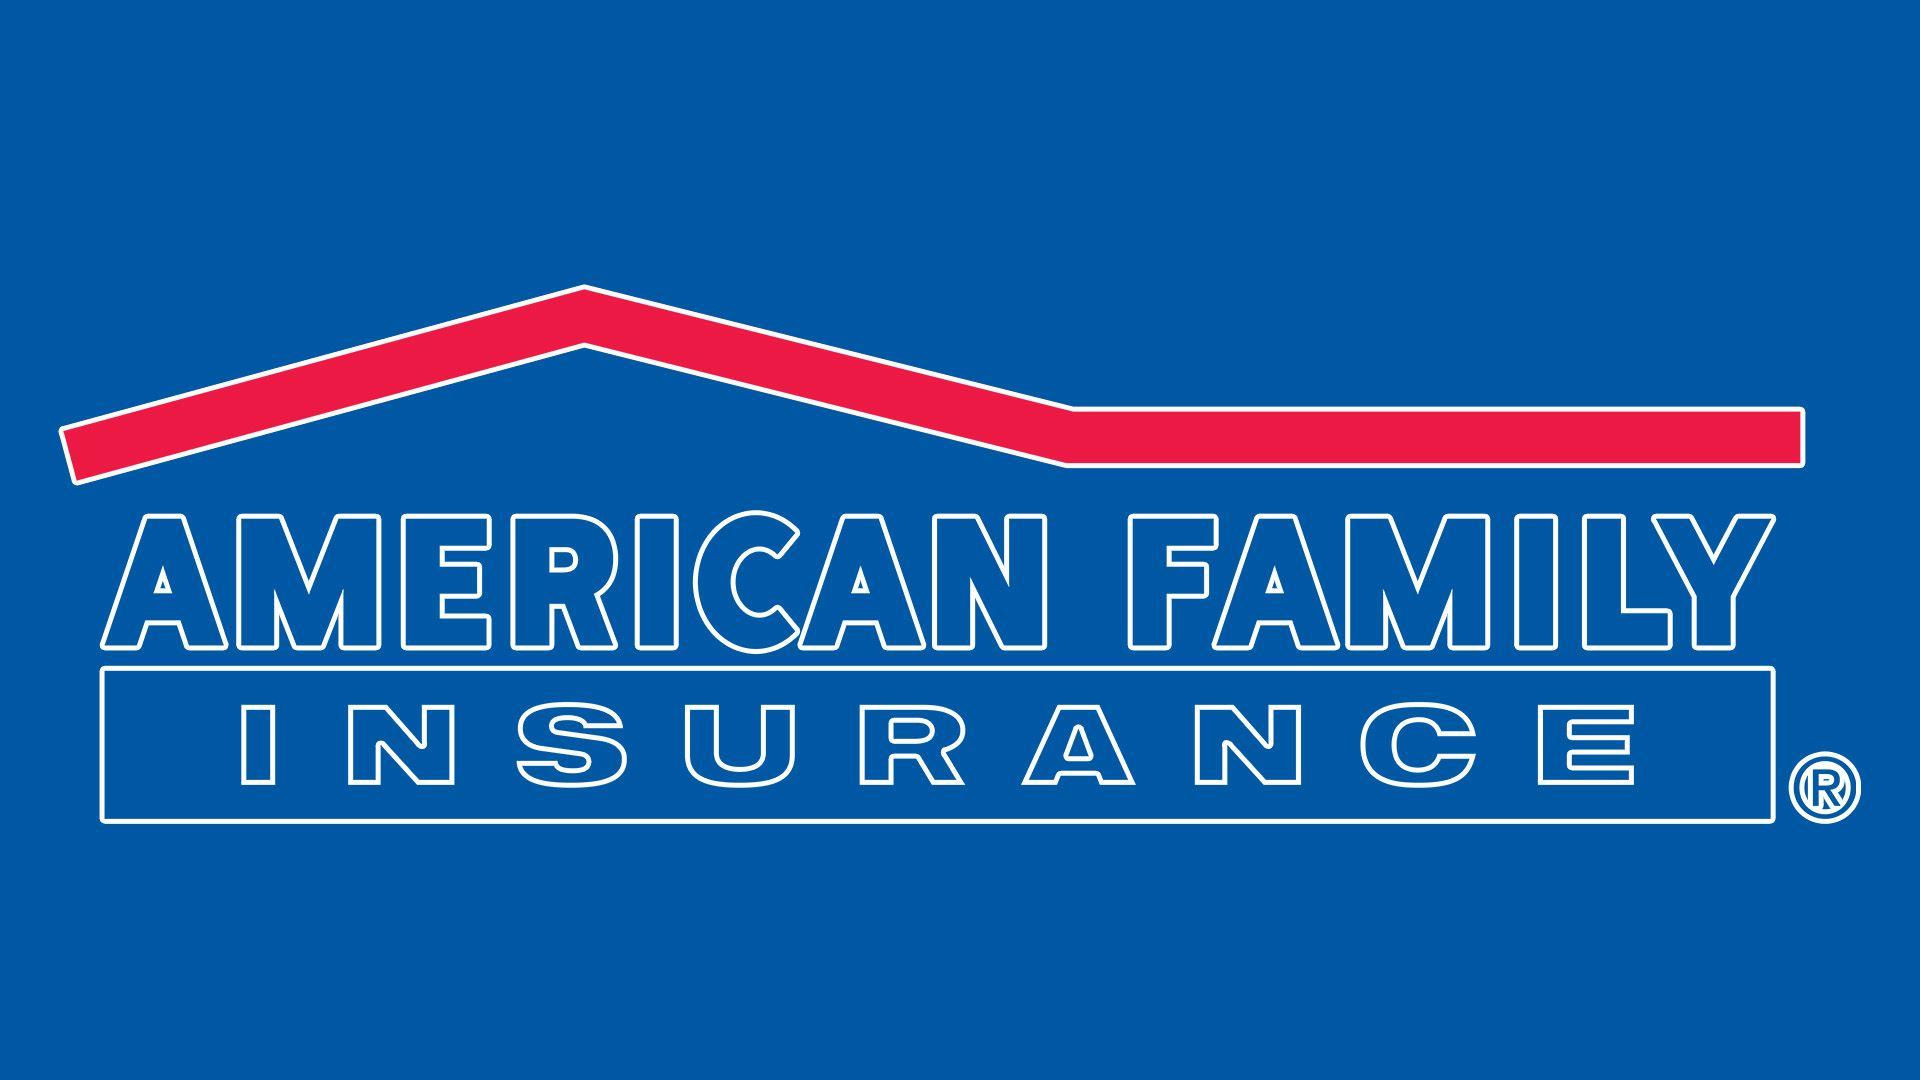 AmFam Roof Logo - American Family Insurance logo, symbol, meaning, History and Evolution